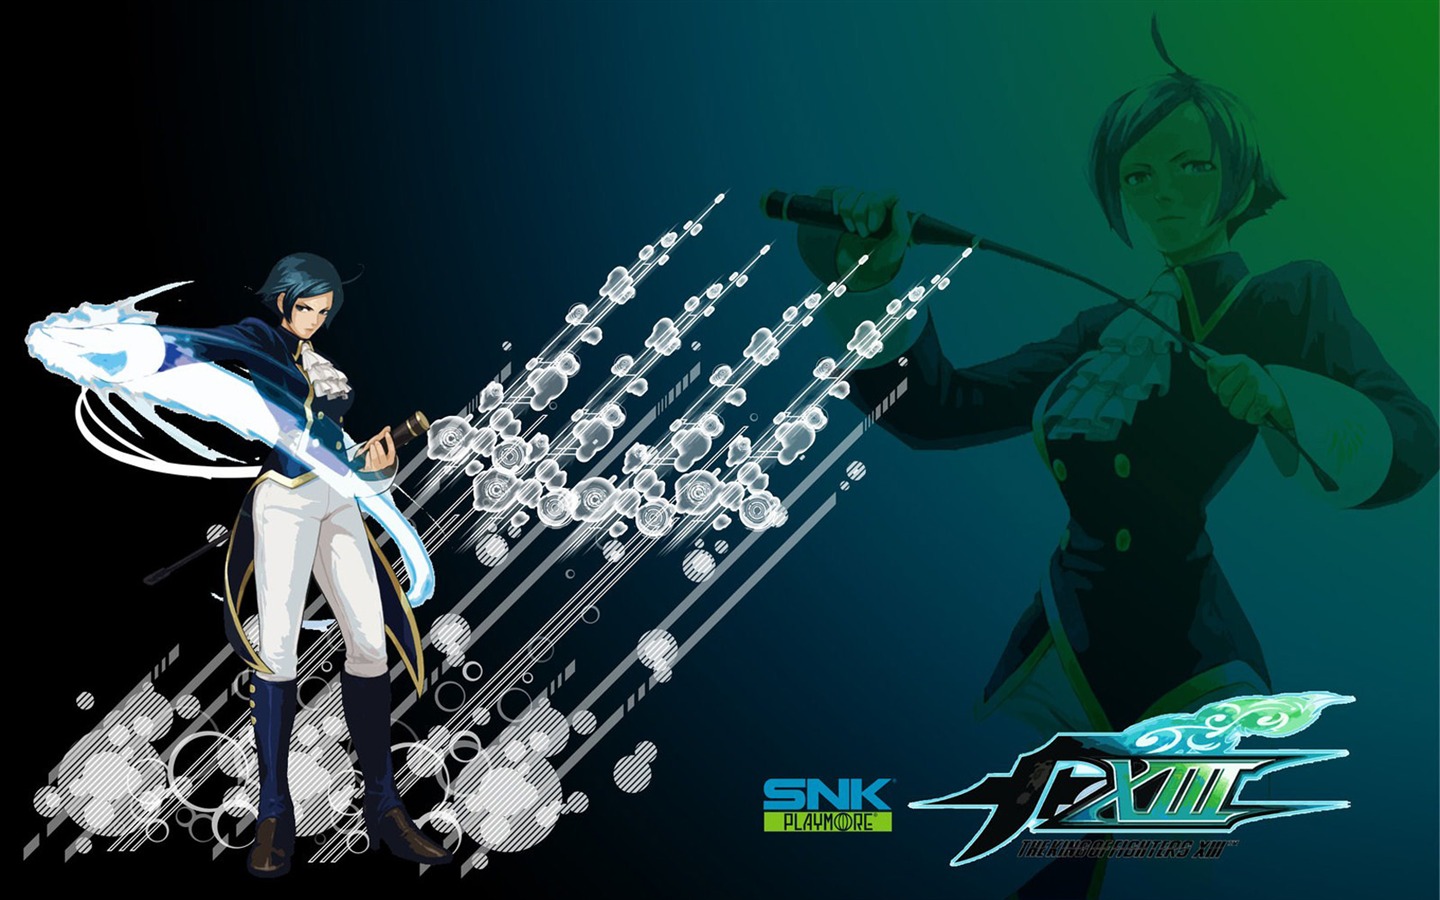 Le roi de wallpapers Fighters XIII #11 - 1440x900